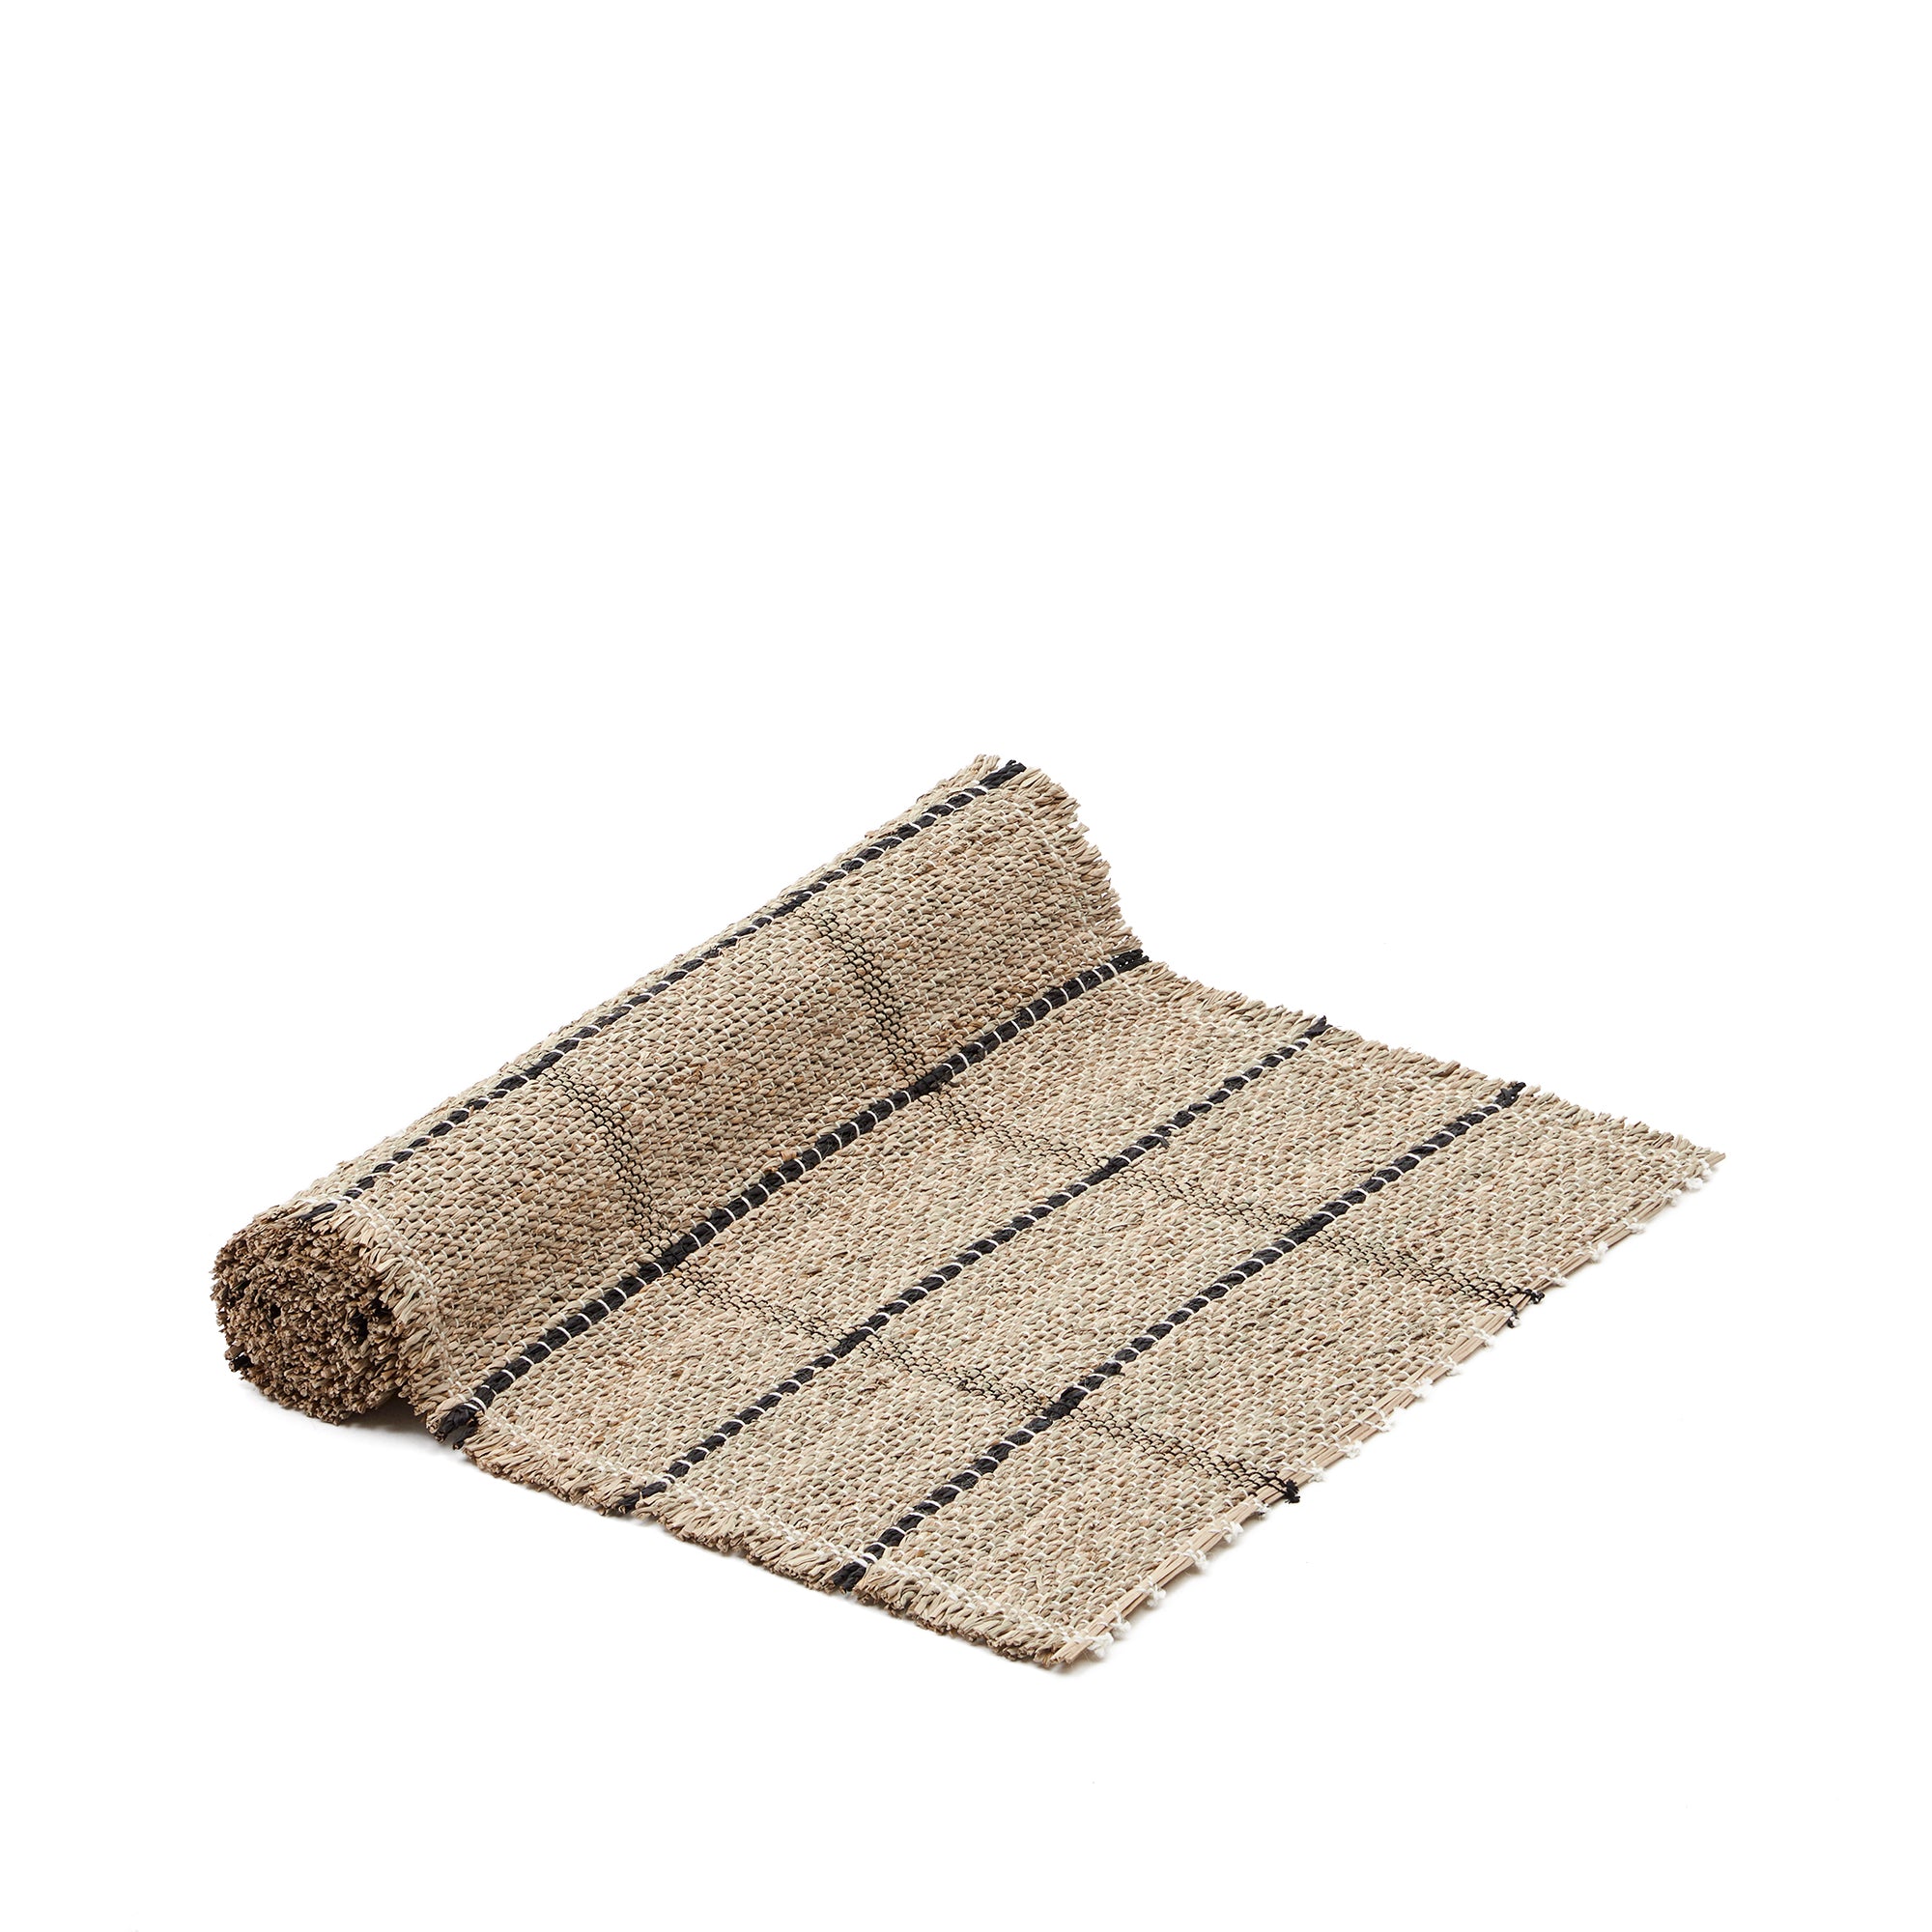 Uya table runner with natural fibers, natural and black finish, 50 x 150 cm